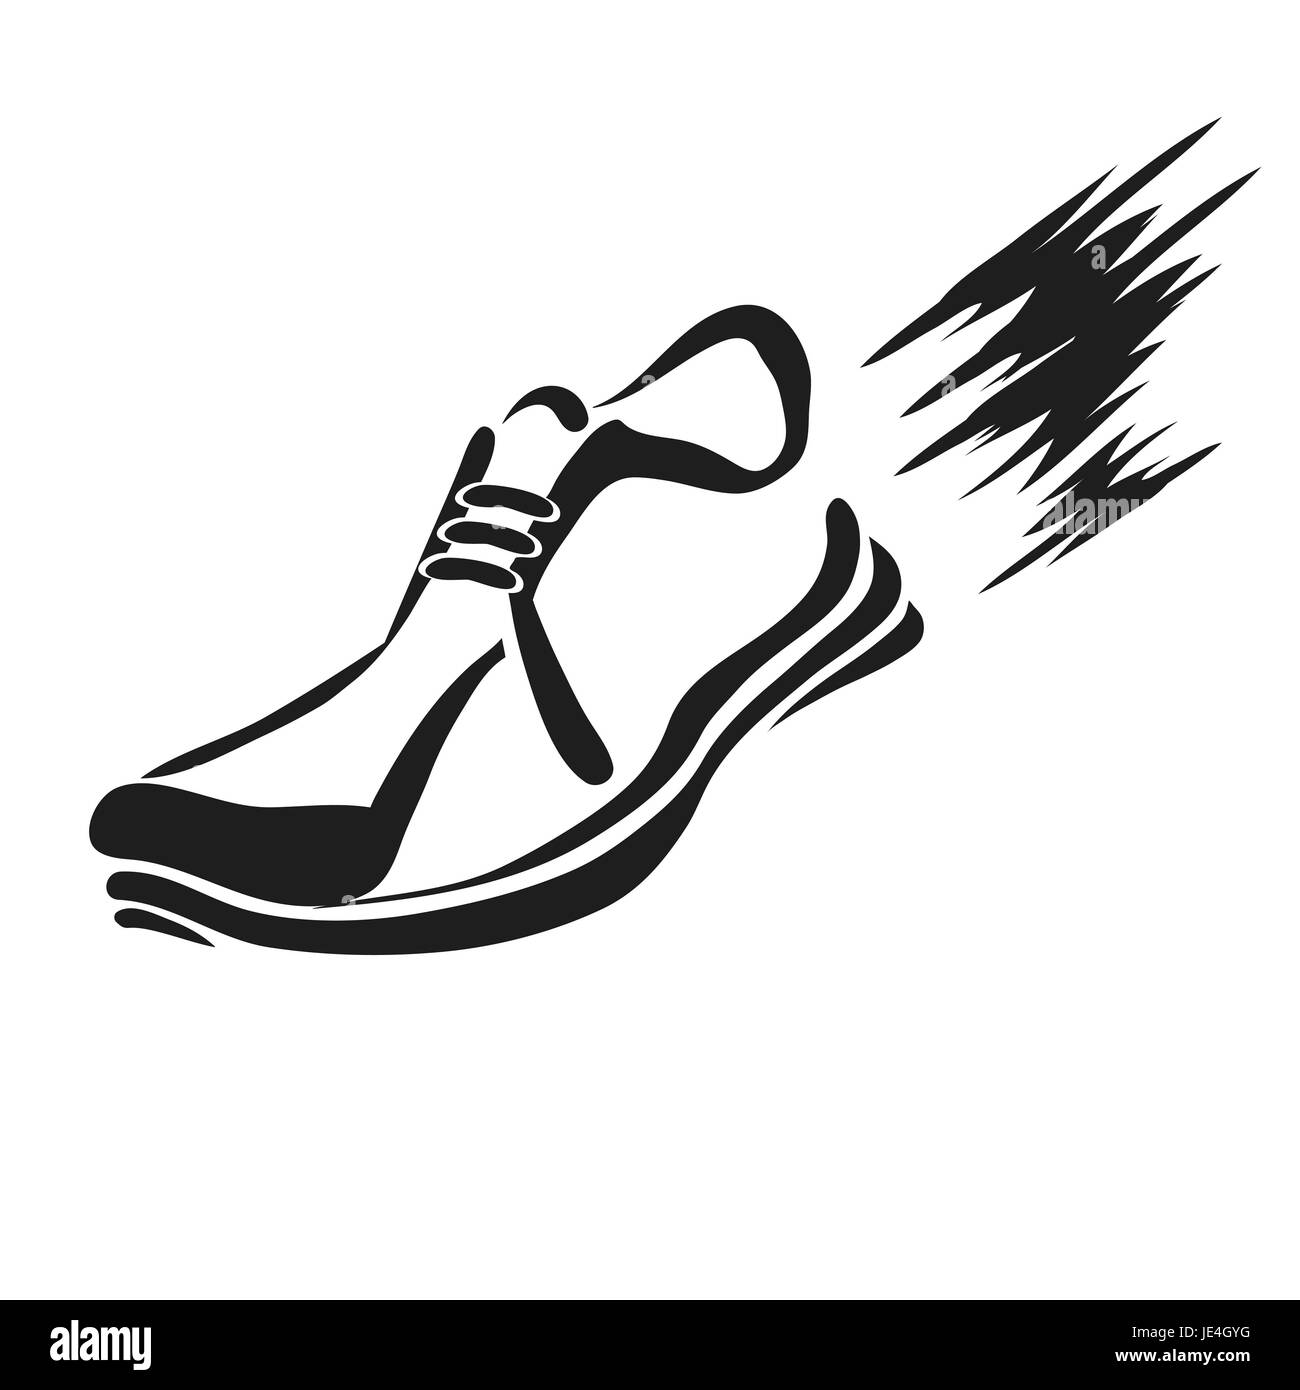 illustration with silhouette of running shoe icon on a white background  Stock Photo - Alamy